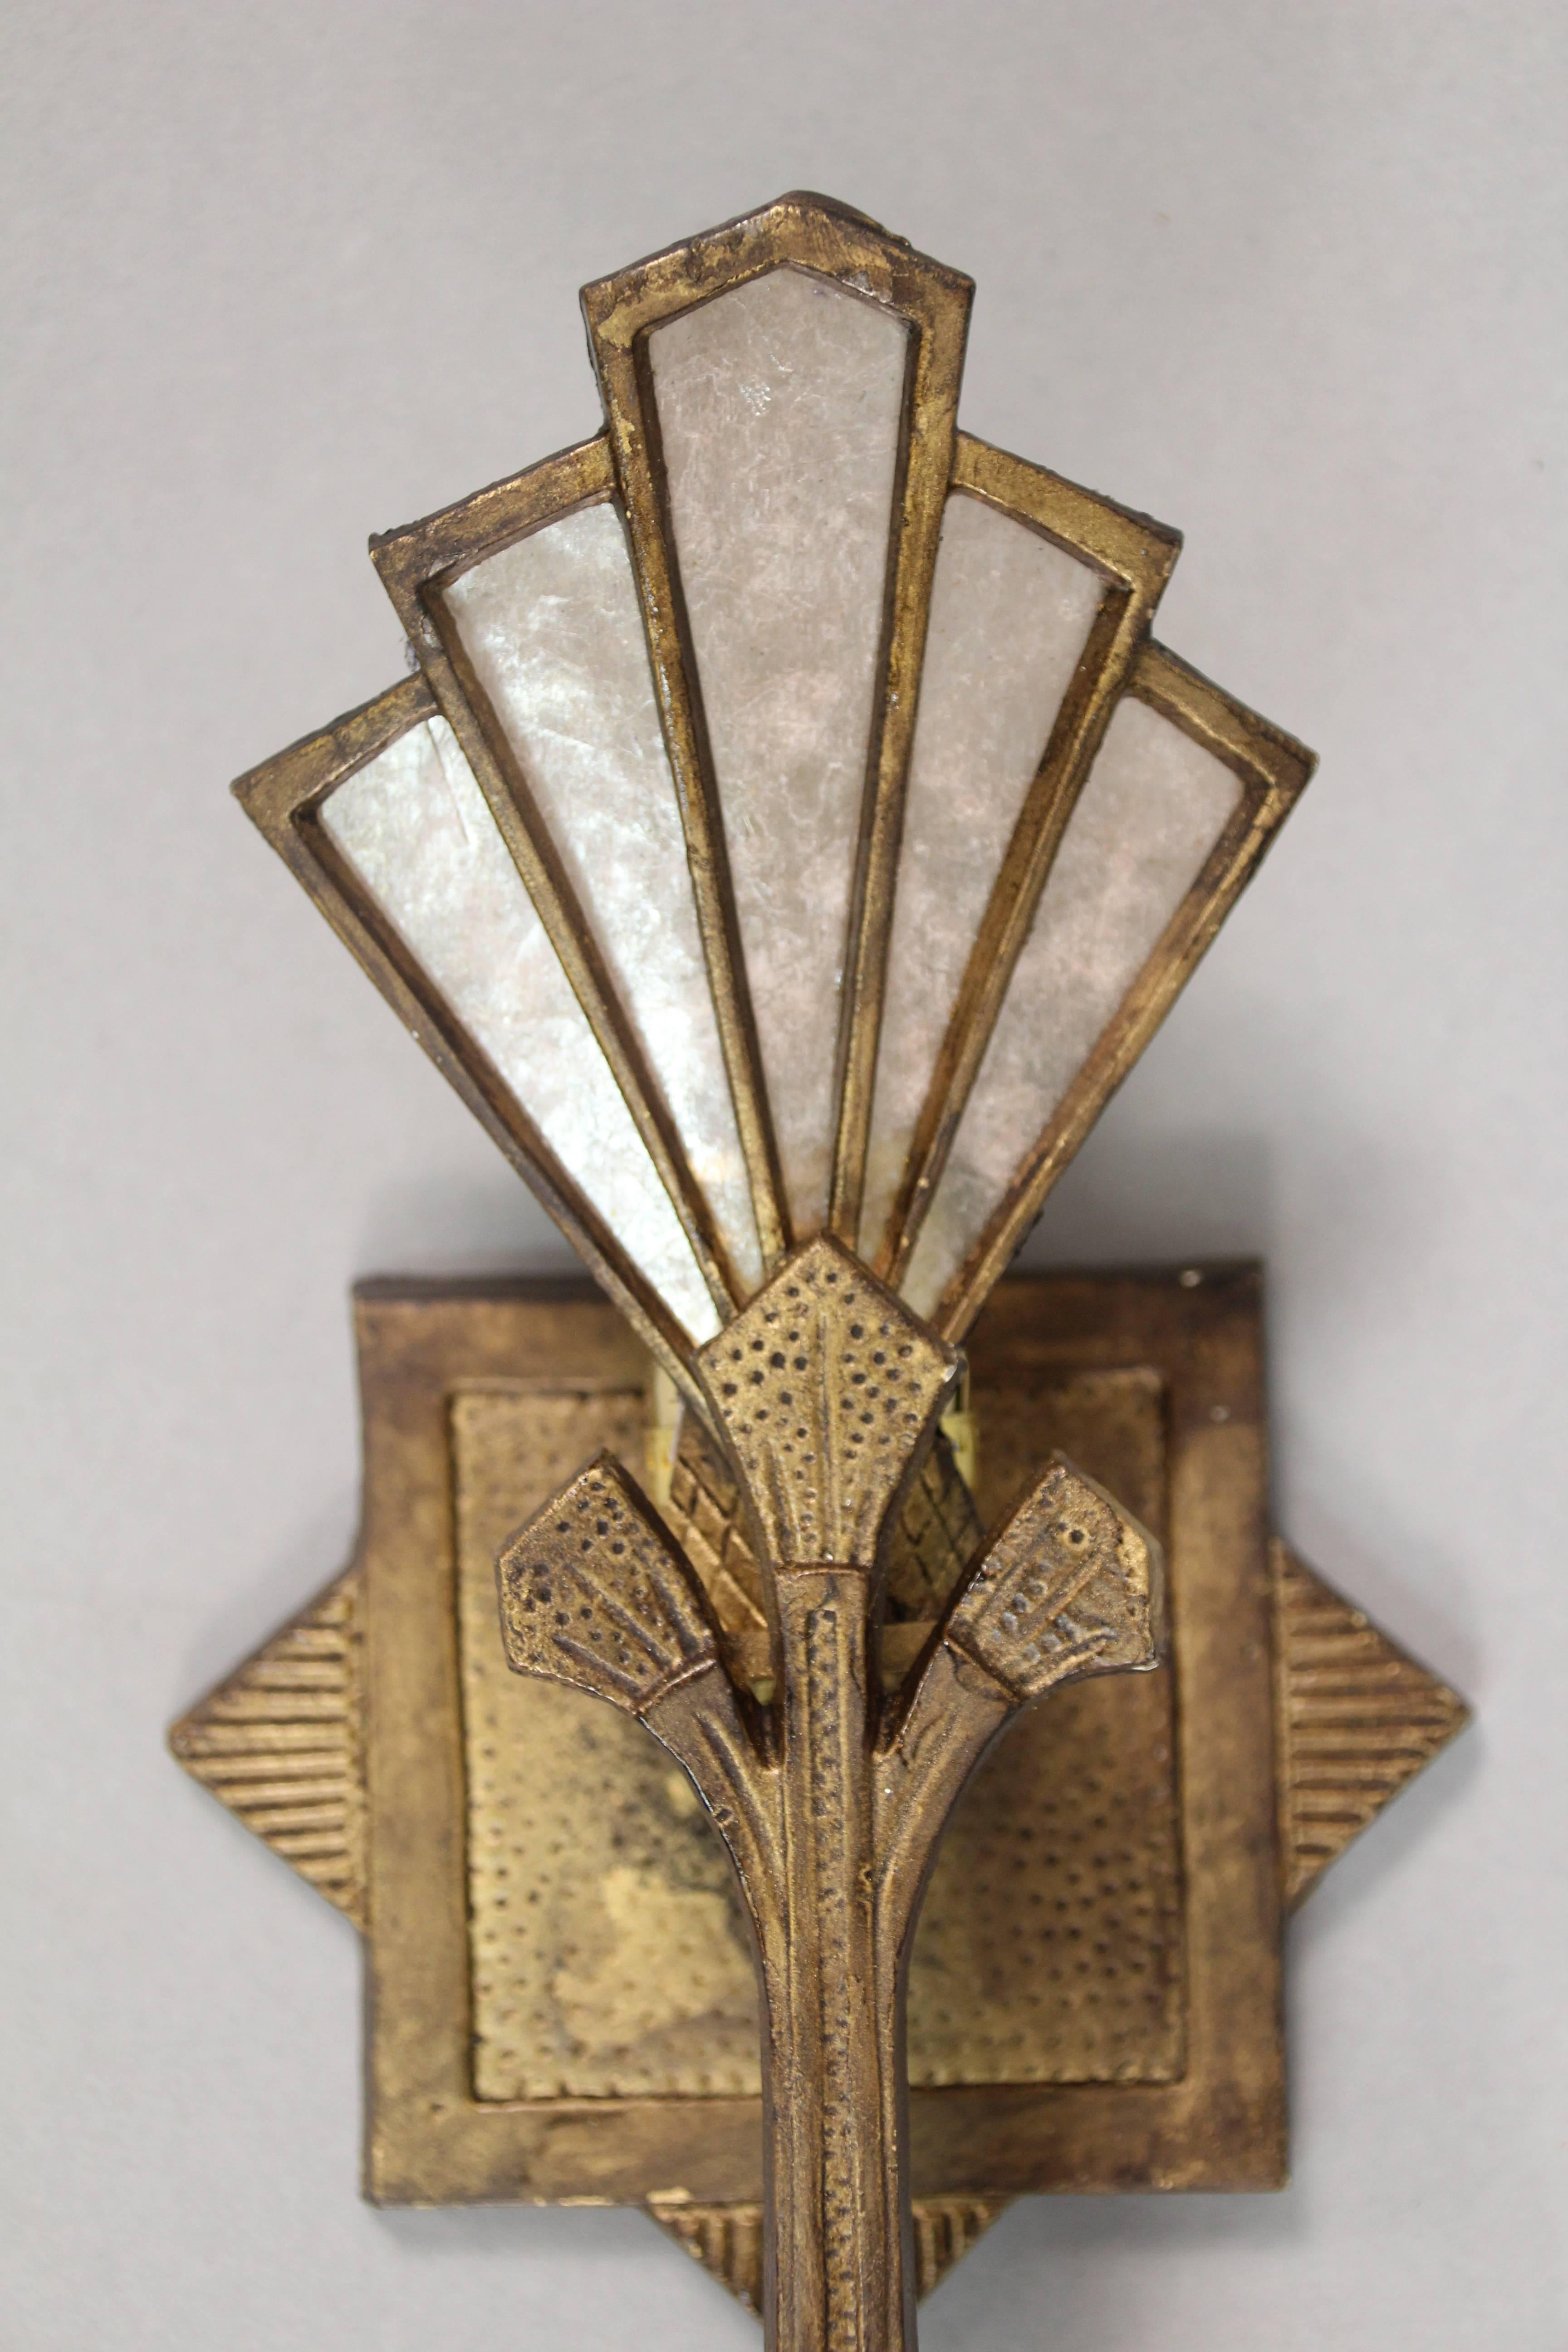 Deco sconce with new mica insert, circa 1930s.